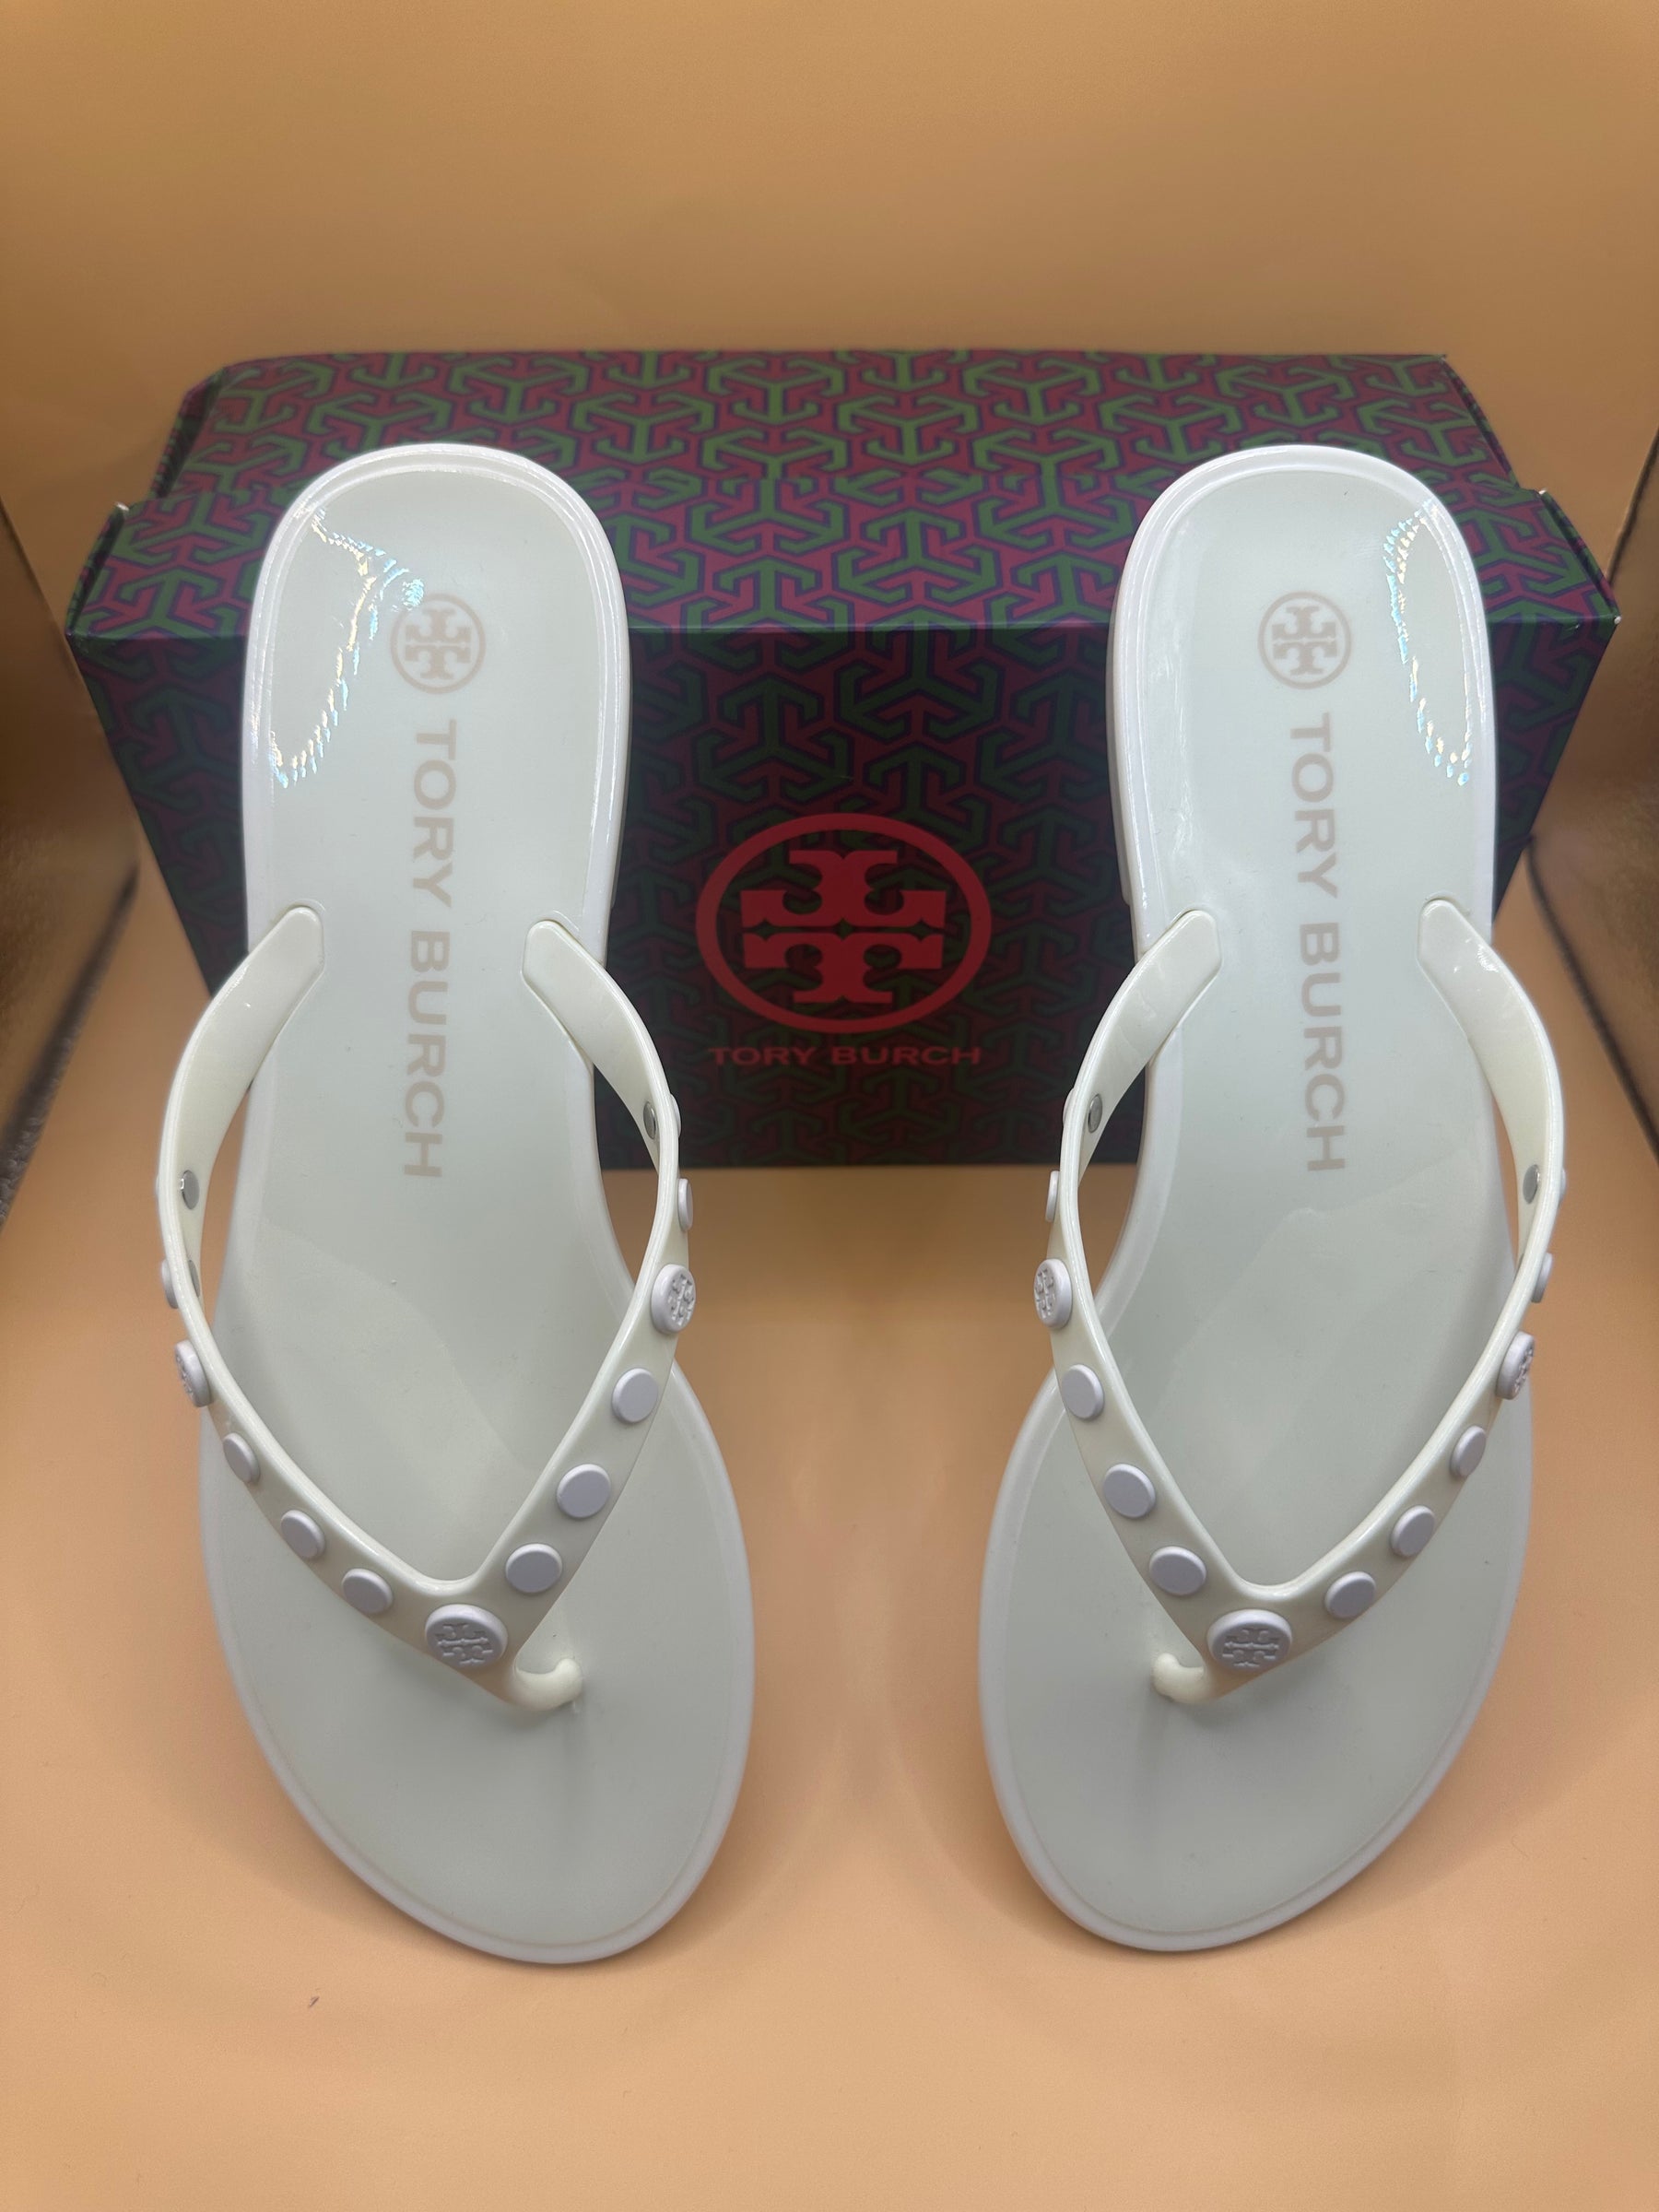 Tory Burch Studded Jelly Sandals